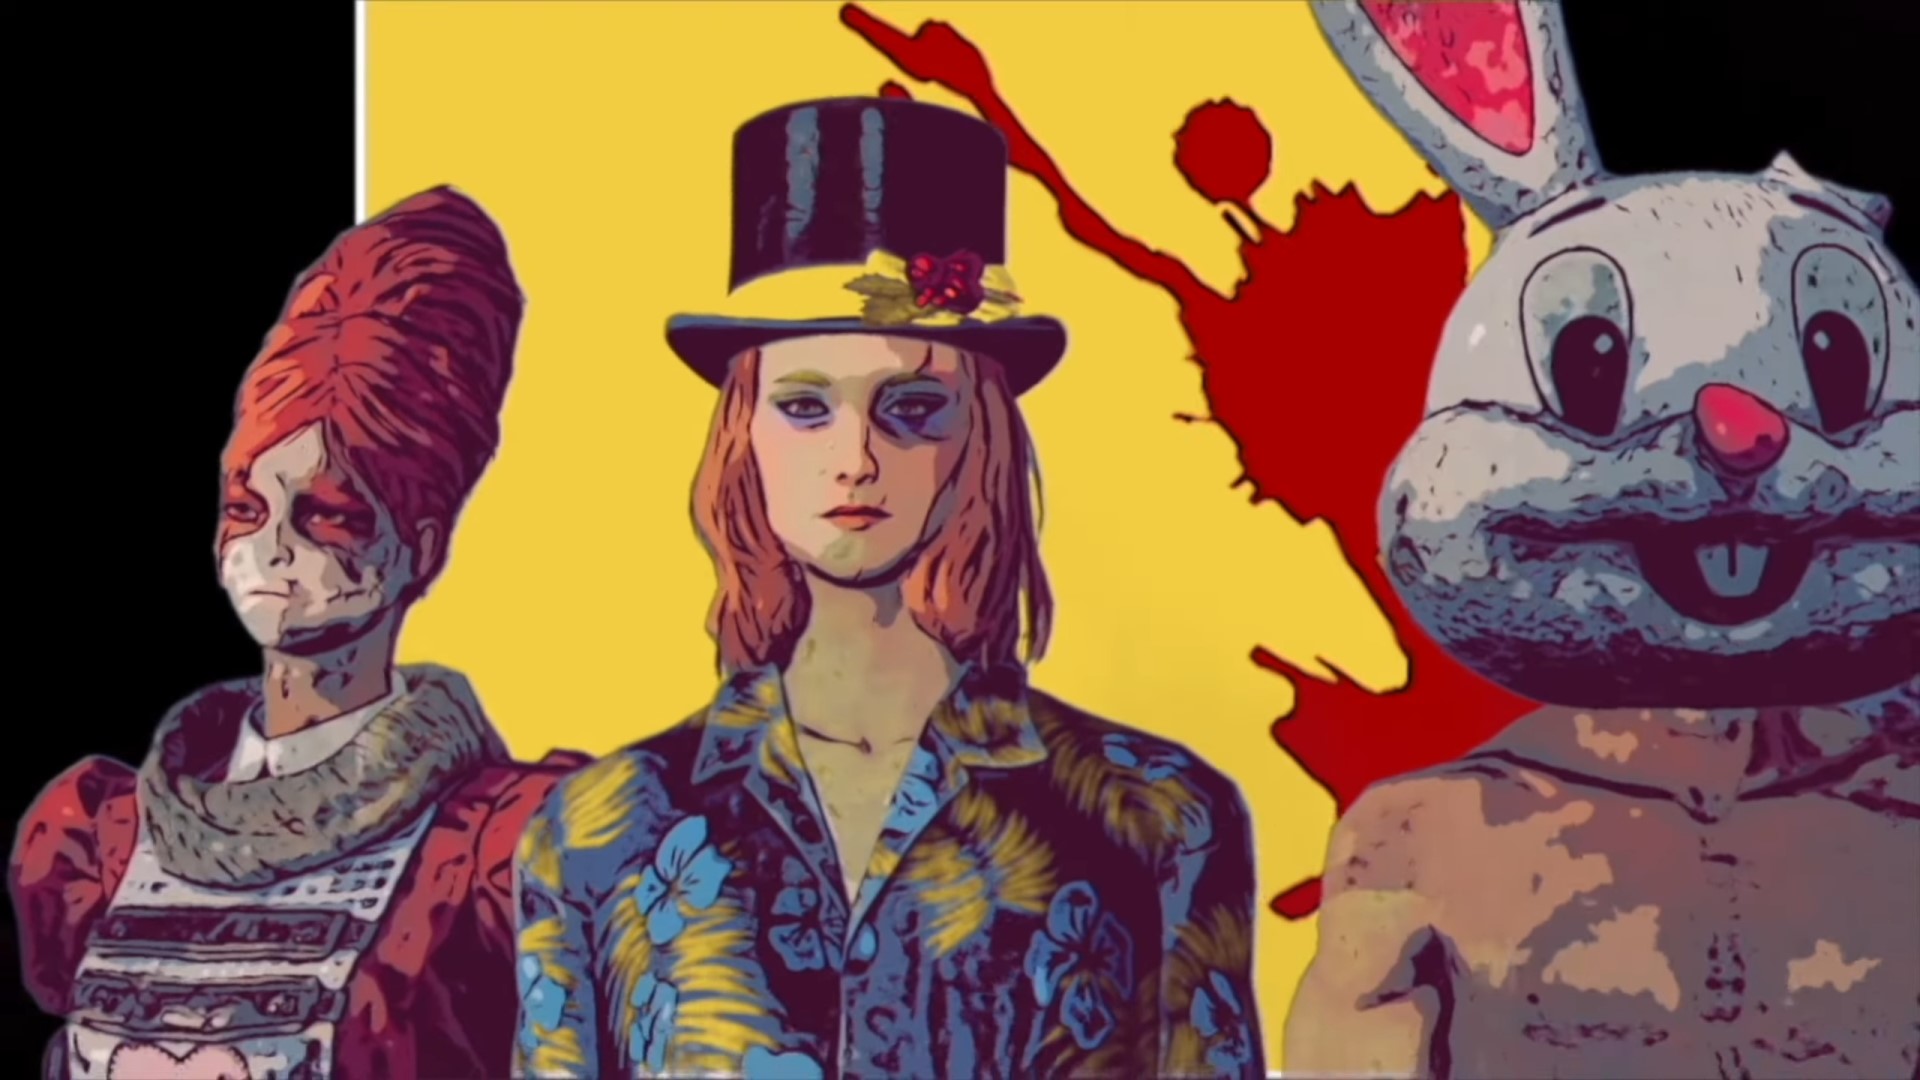 Fallout 76 theatre group plans a trippy version of Alice in Wonderland